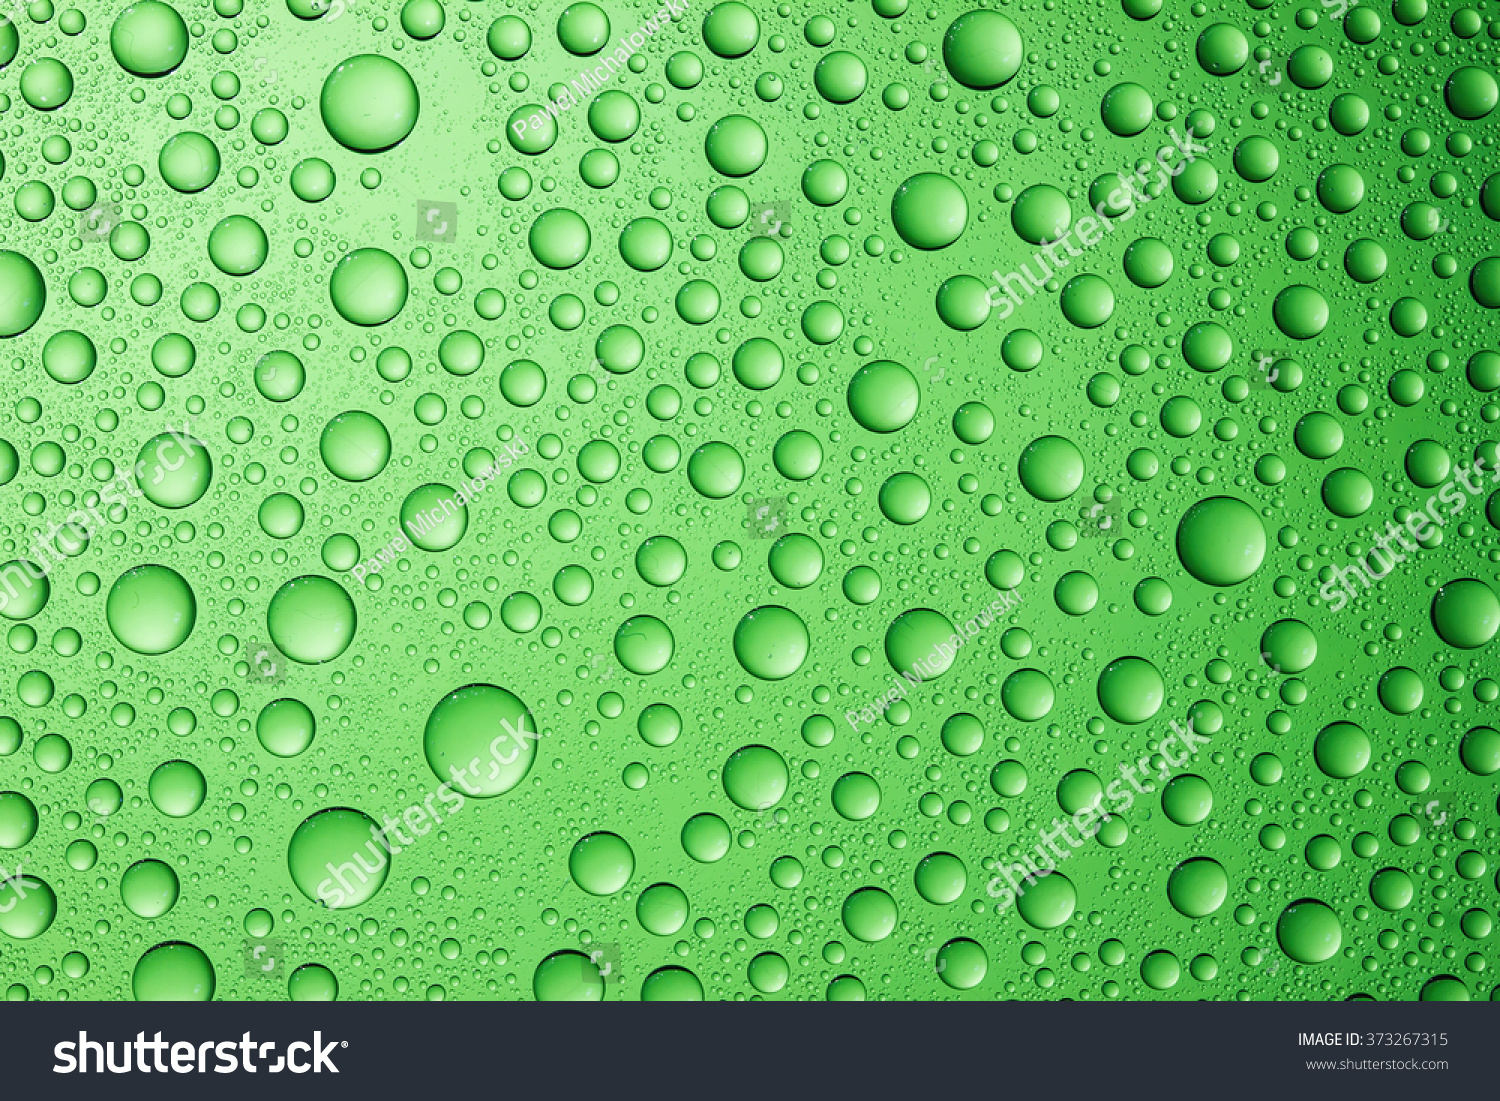 Water Drops On Green Glass Surface Stock Photo 373267315 - Shutterstock